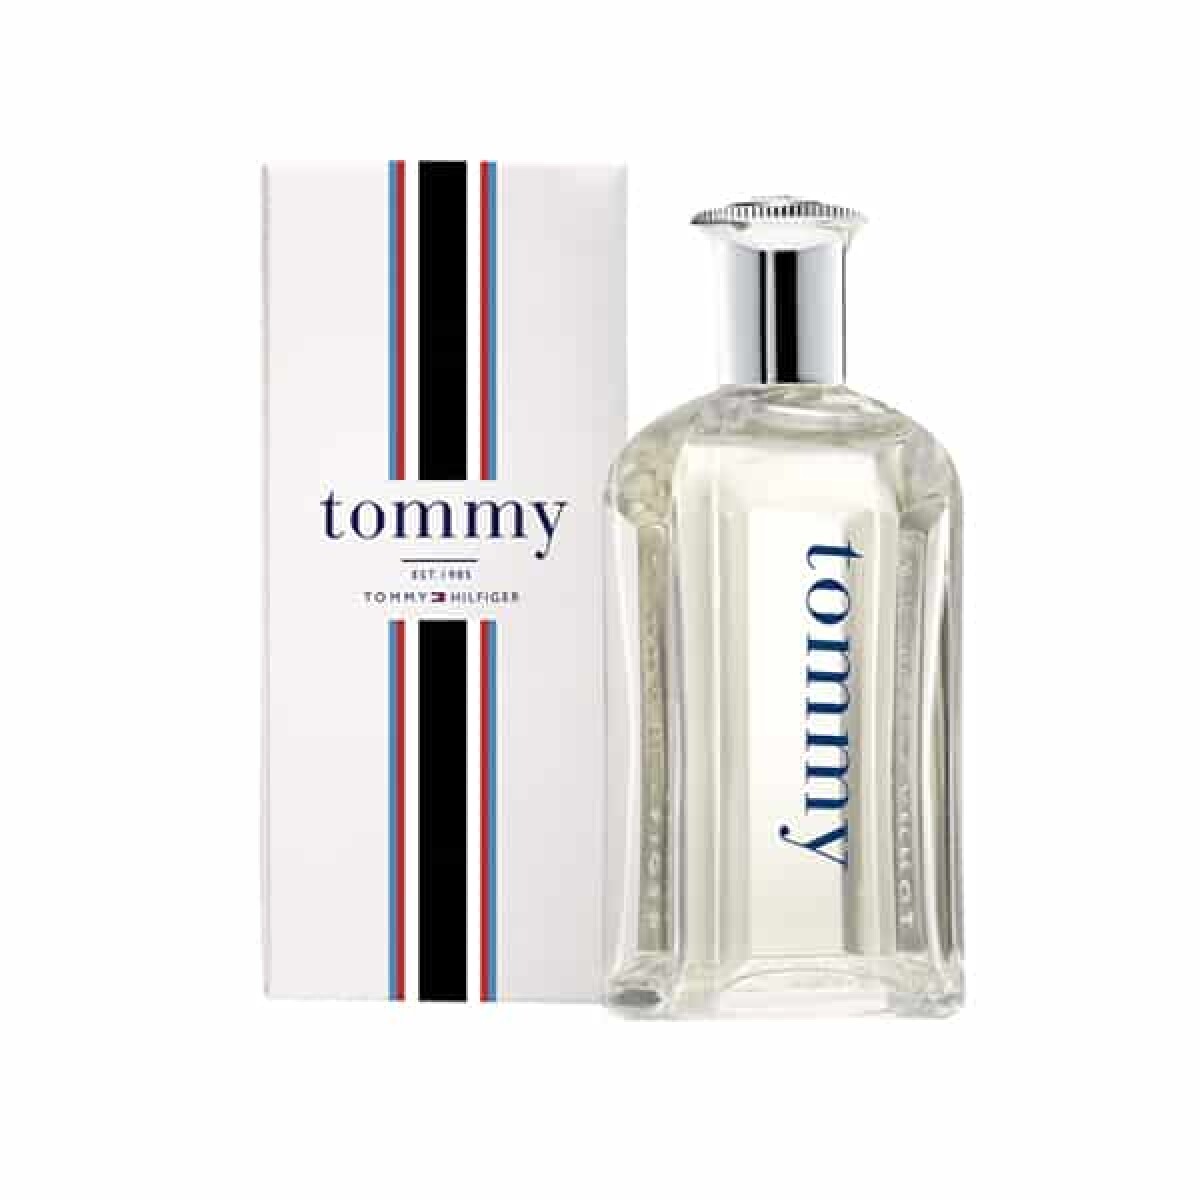 Perfume Tommy Hilfiger Tommy Edt 100 ml 